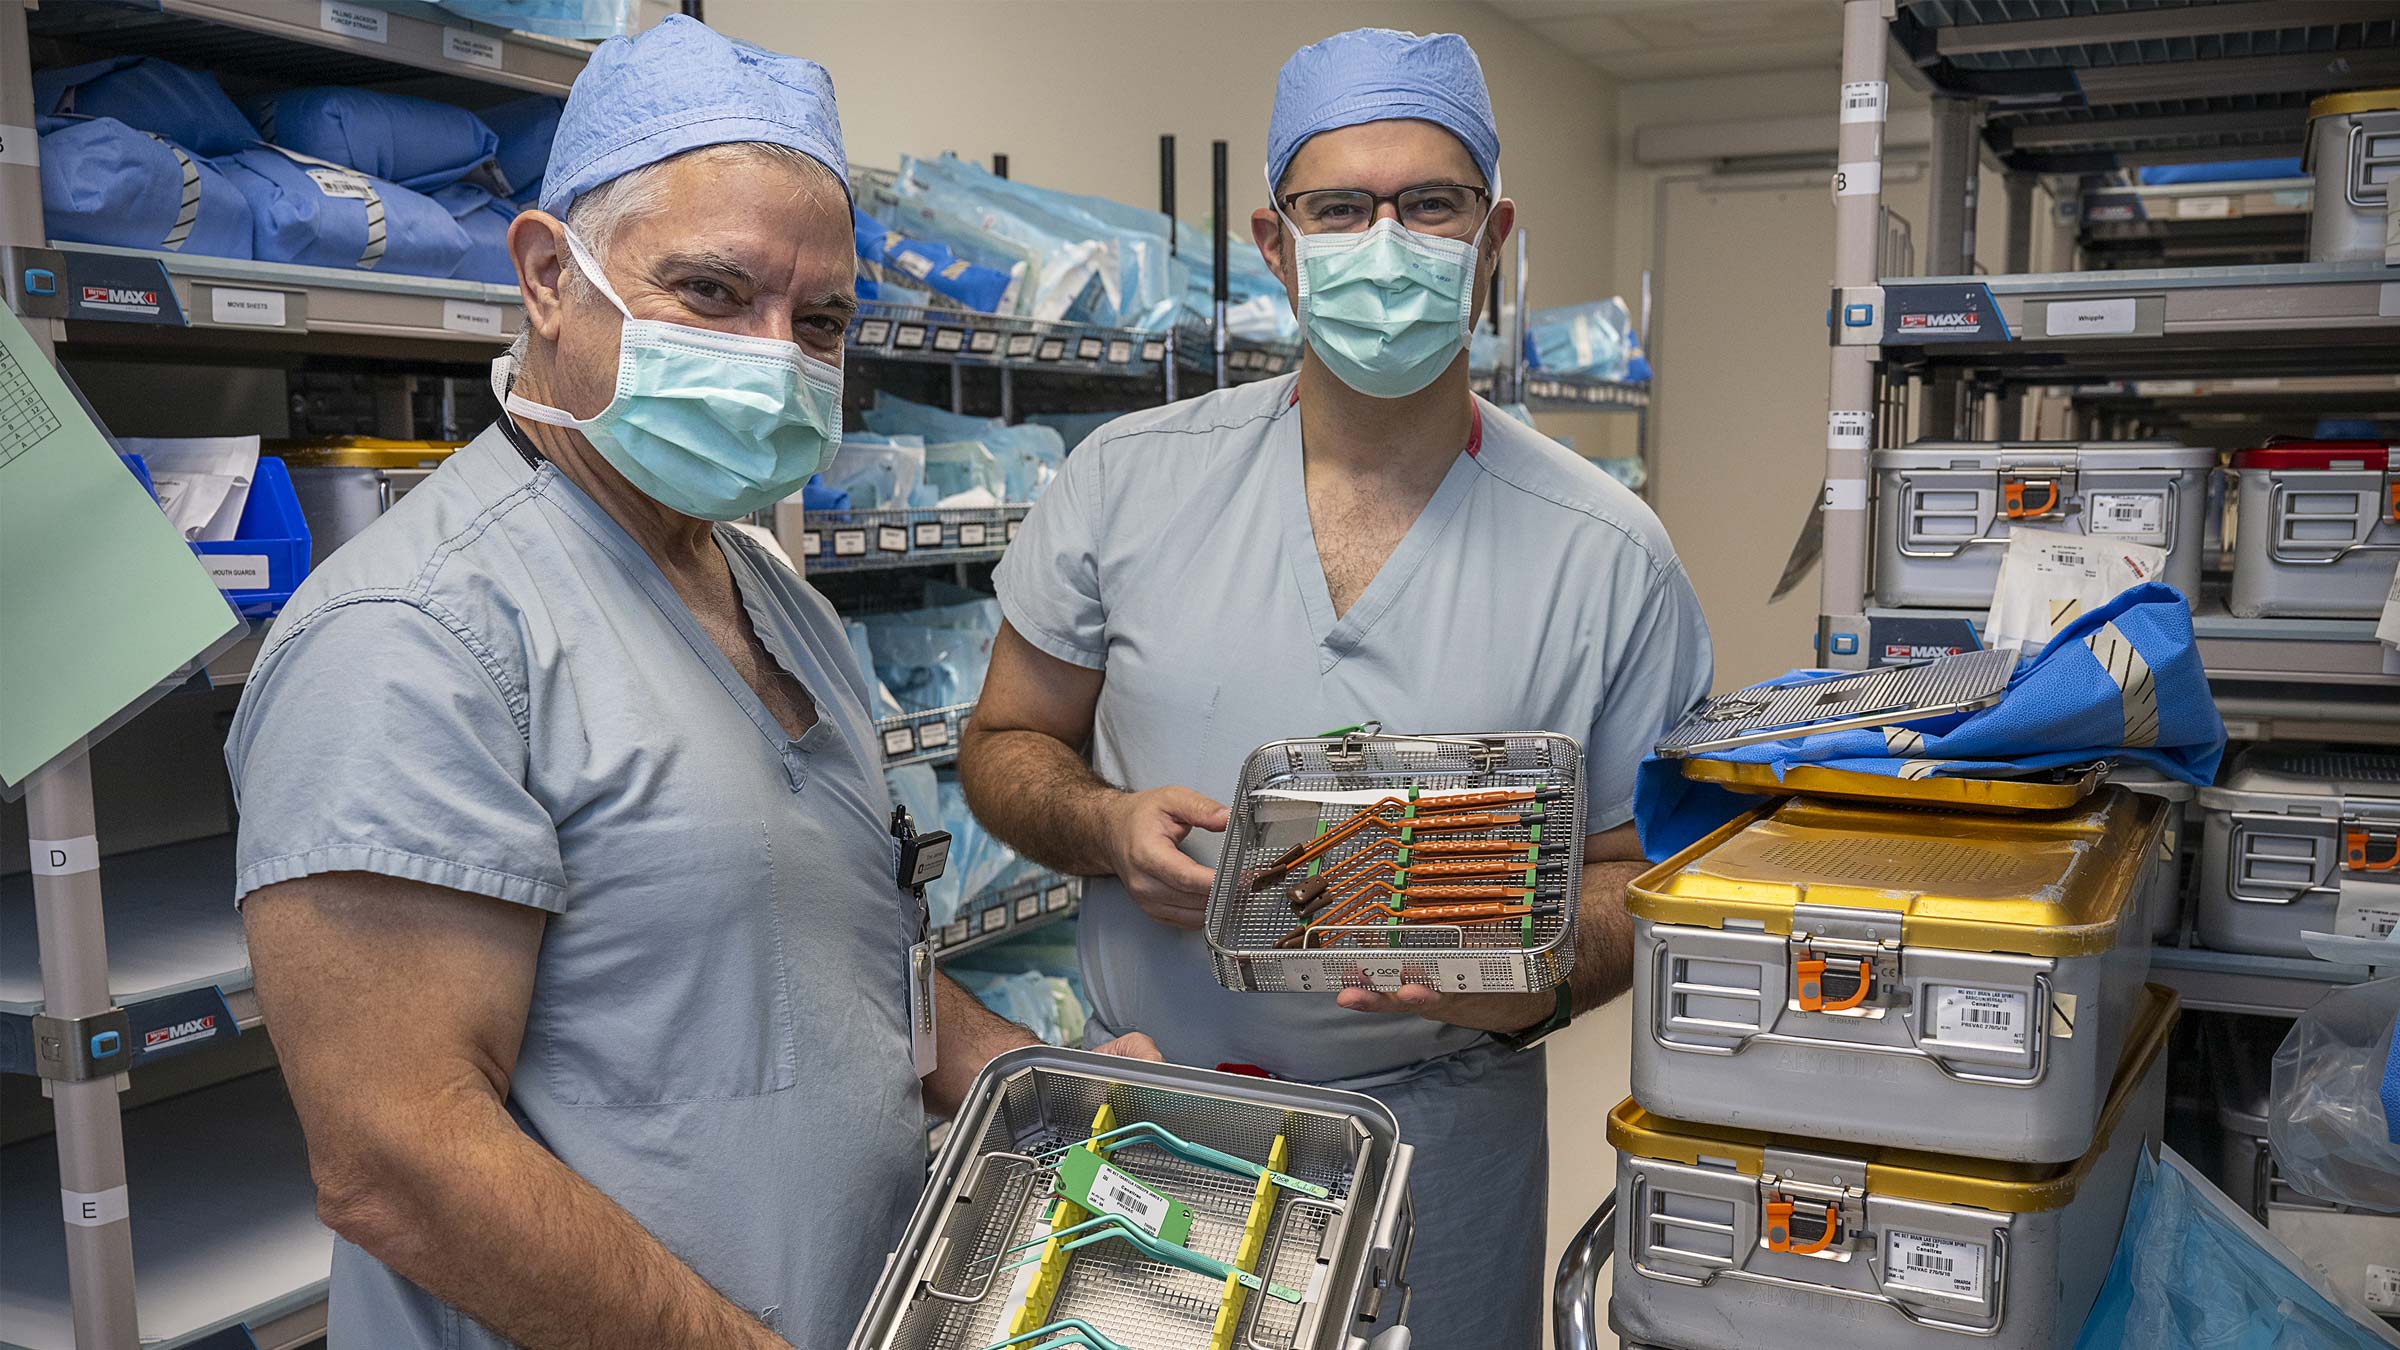 Worlds apart, surgeons follow love of science to become leading skull base tumor surgery team